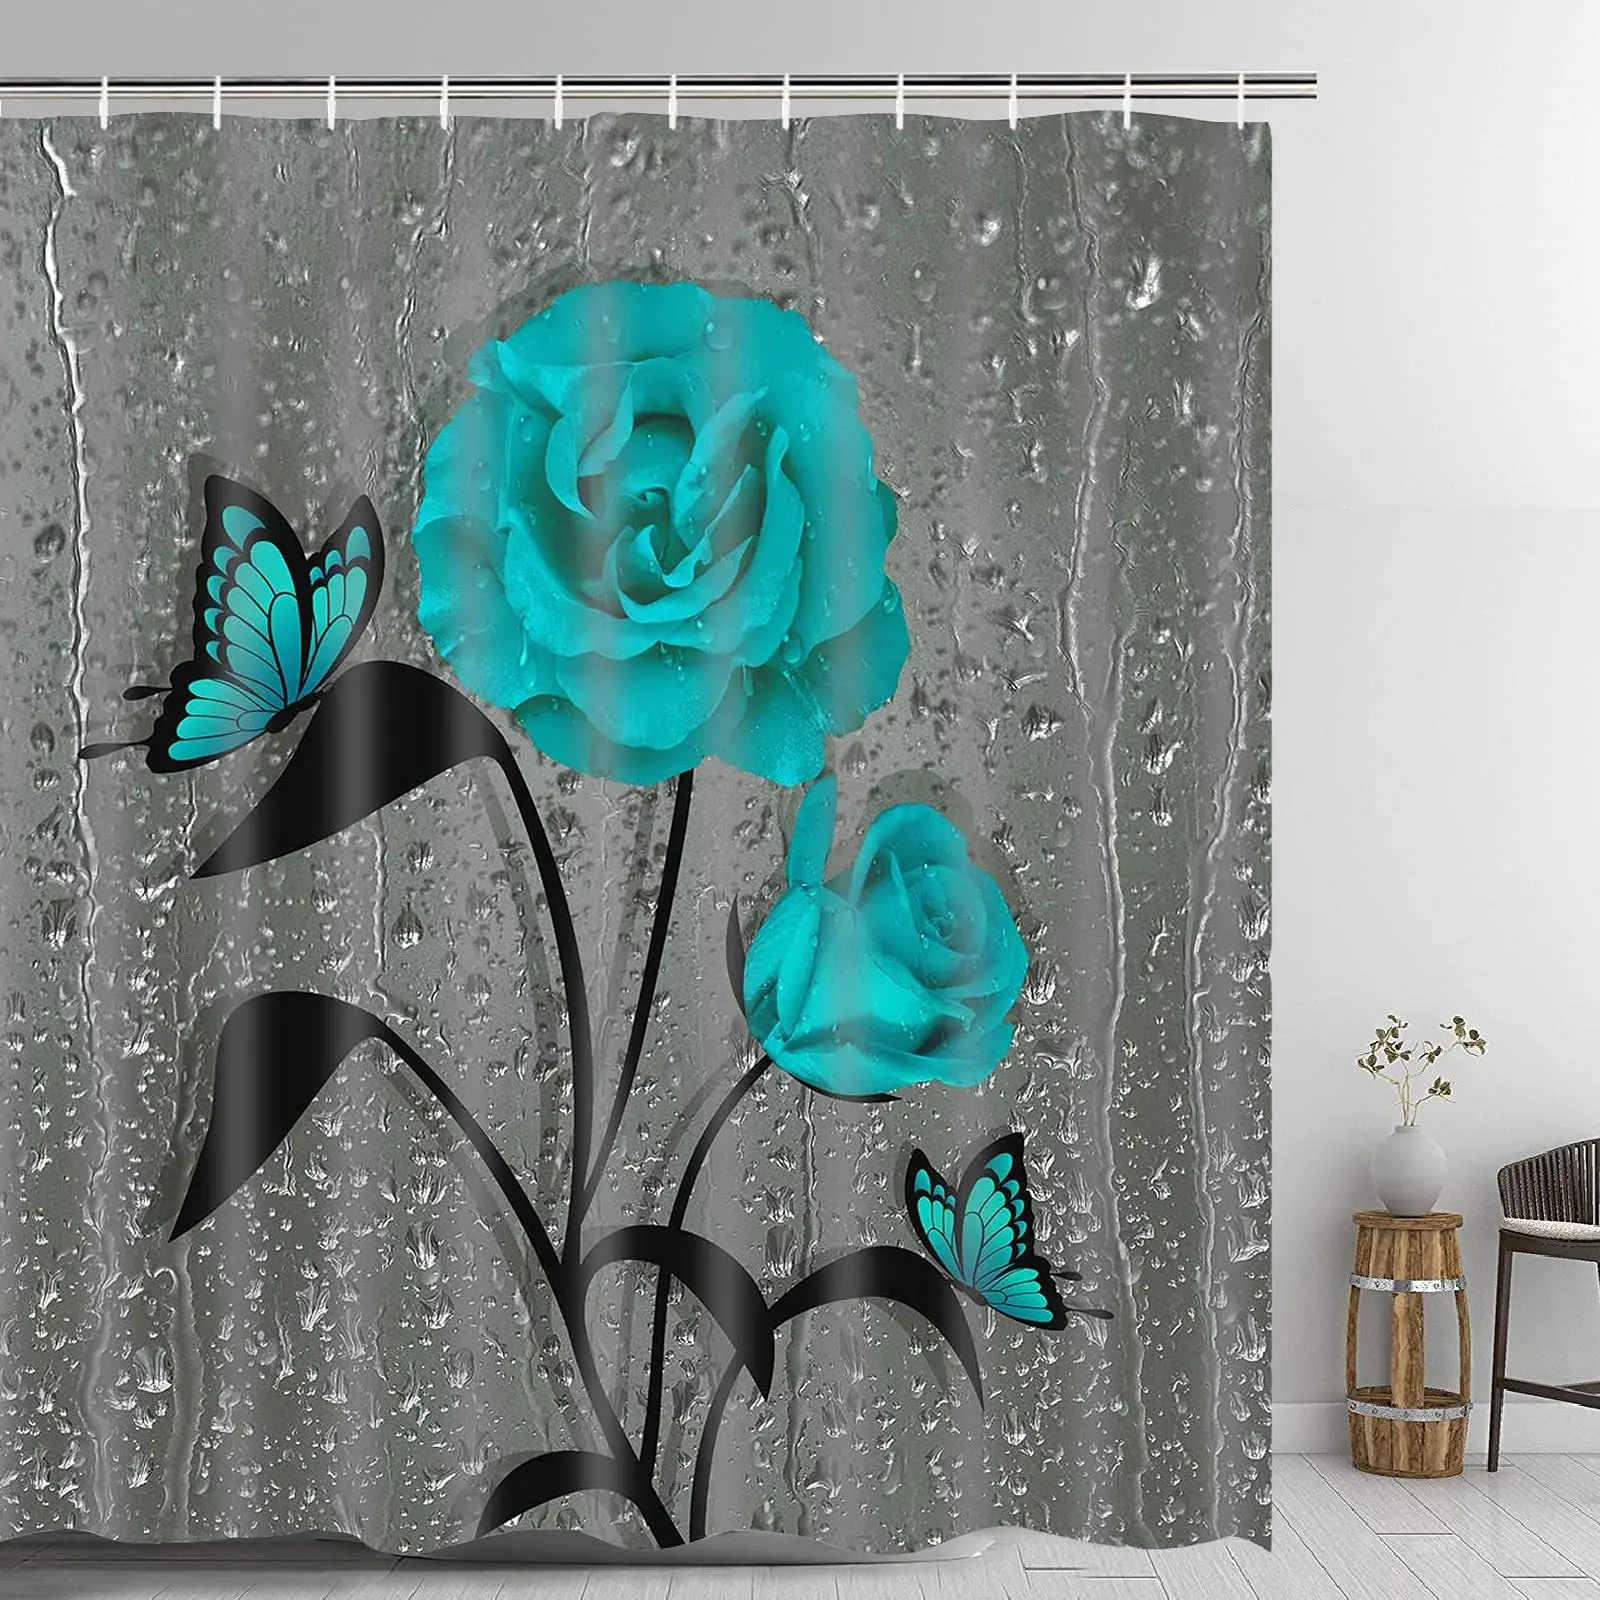 

Turquoise Shower Curtain Waterproof Blue Flower Floral Teal with Roses Watercolor Colorful Abstract Black Home Decor Hooks Set